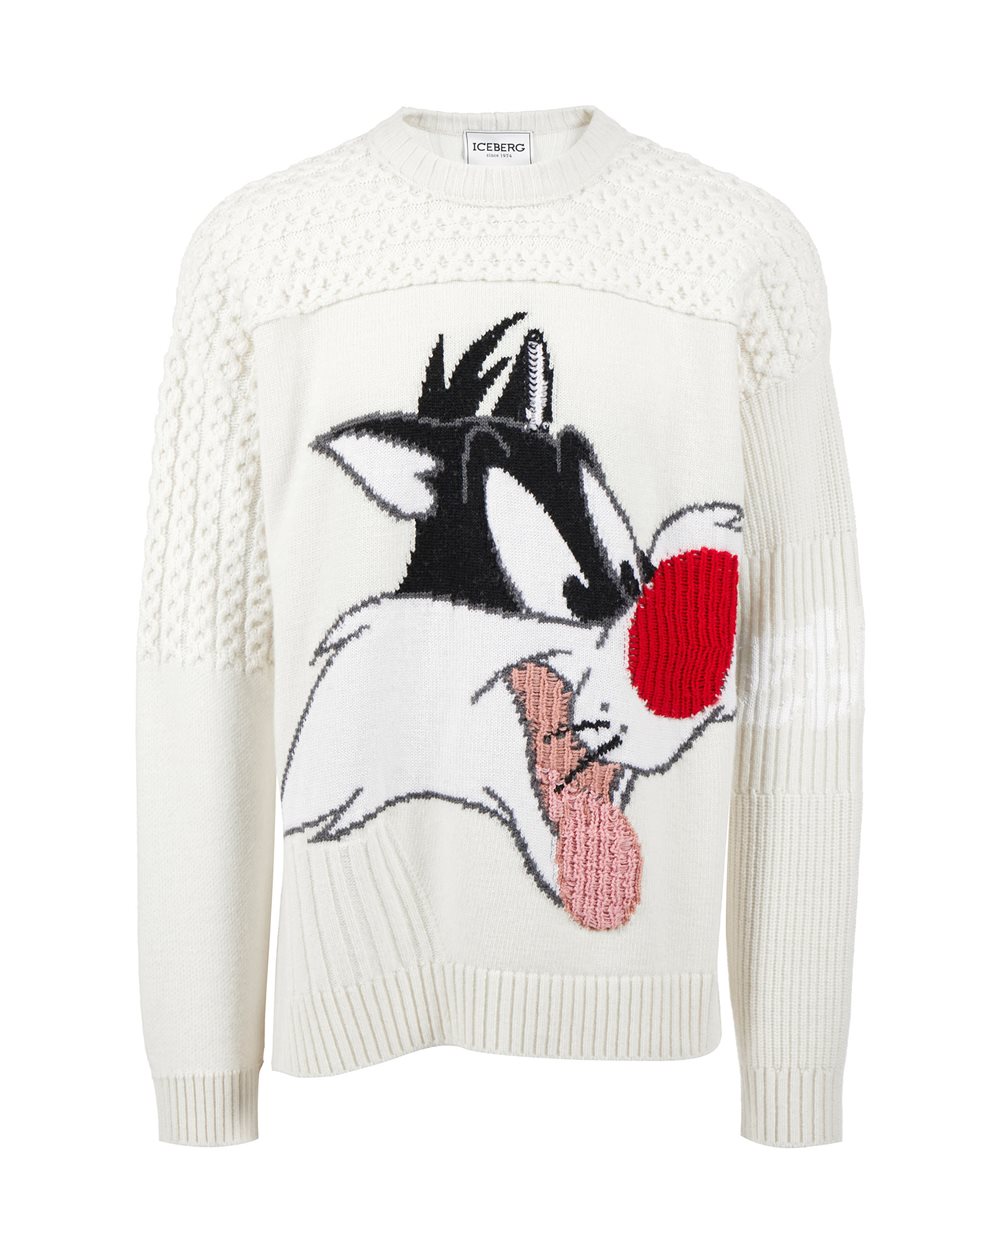 Sweater with logo and cartoon detail - Fashion Show Man | Iceberg - Official Website